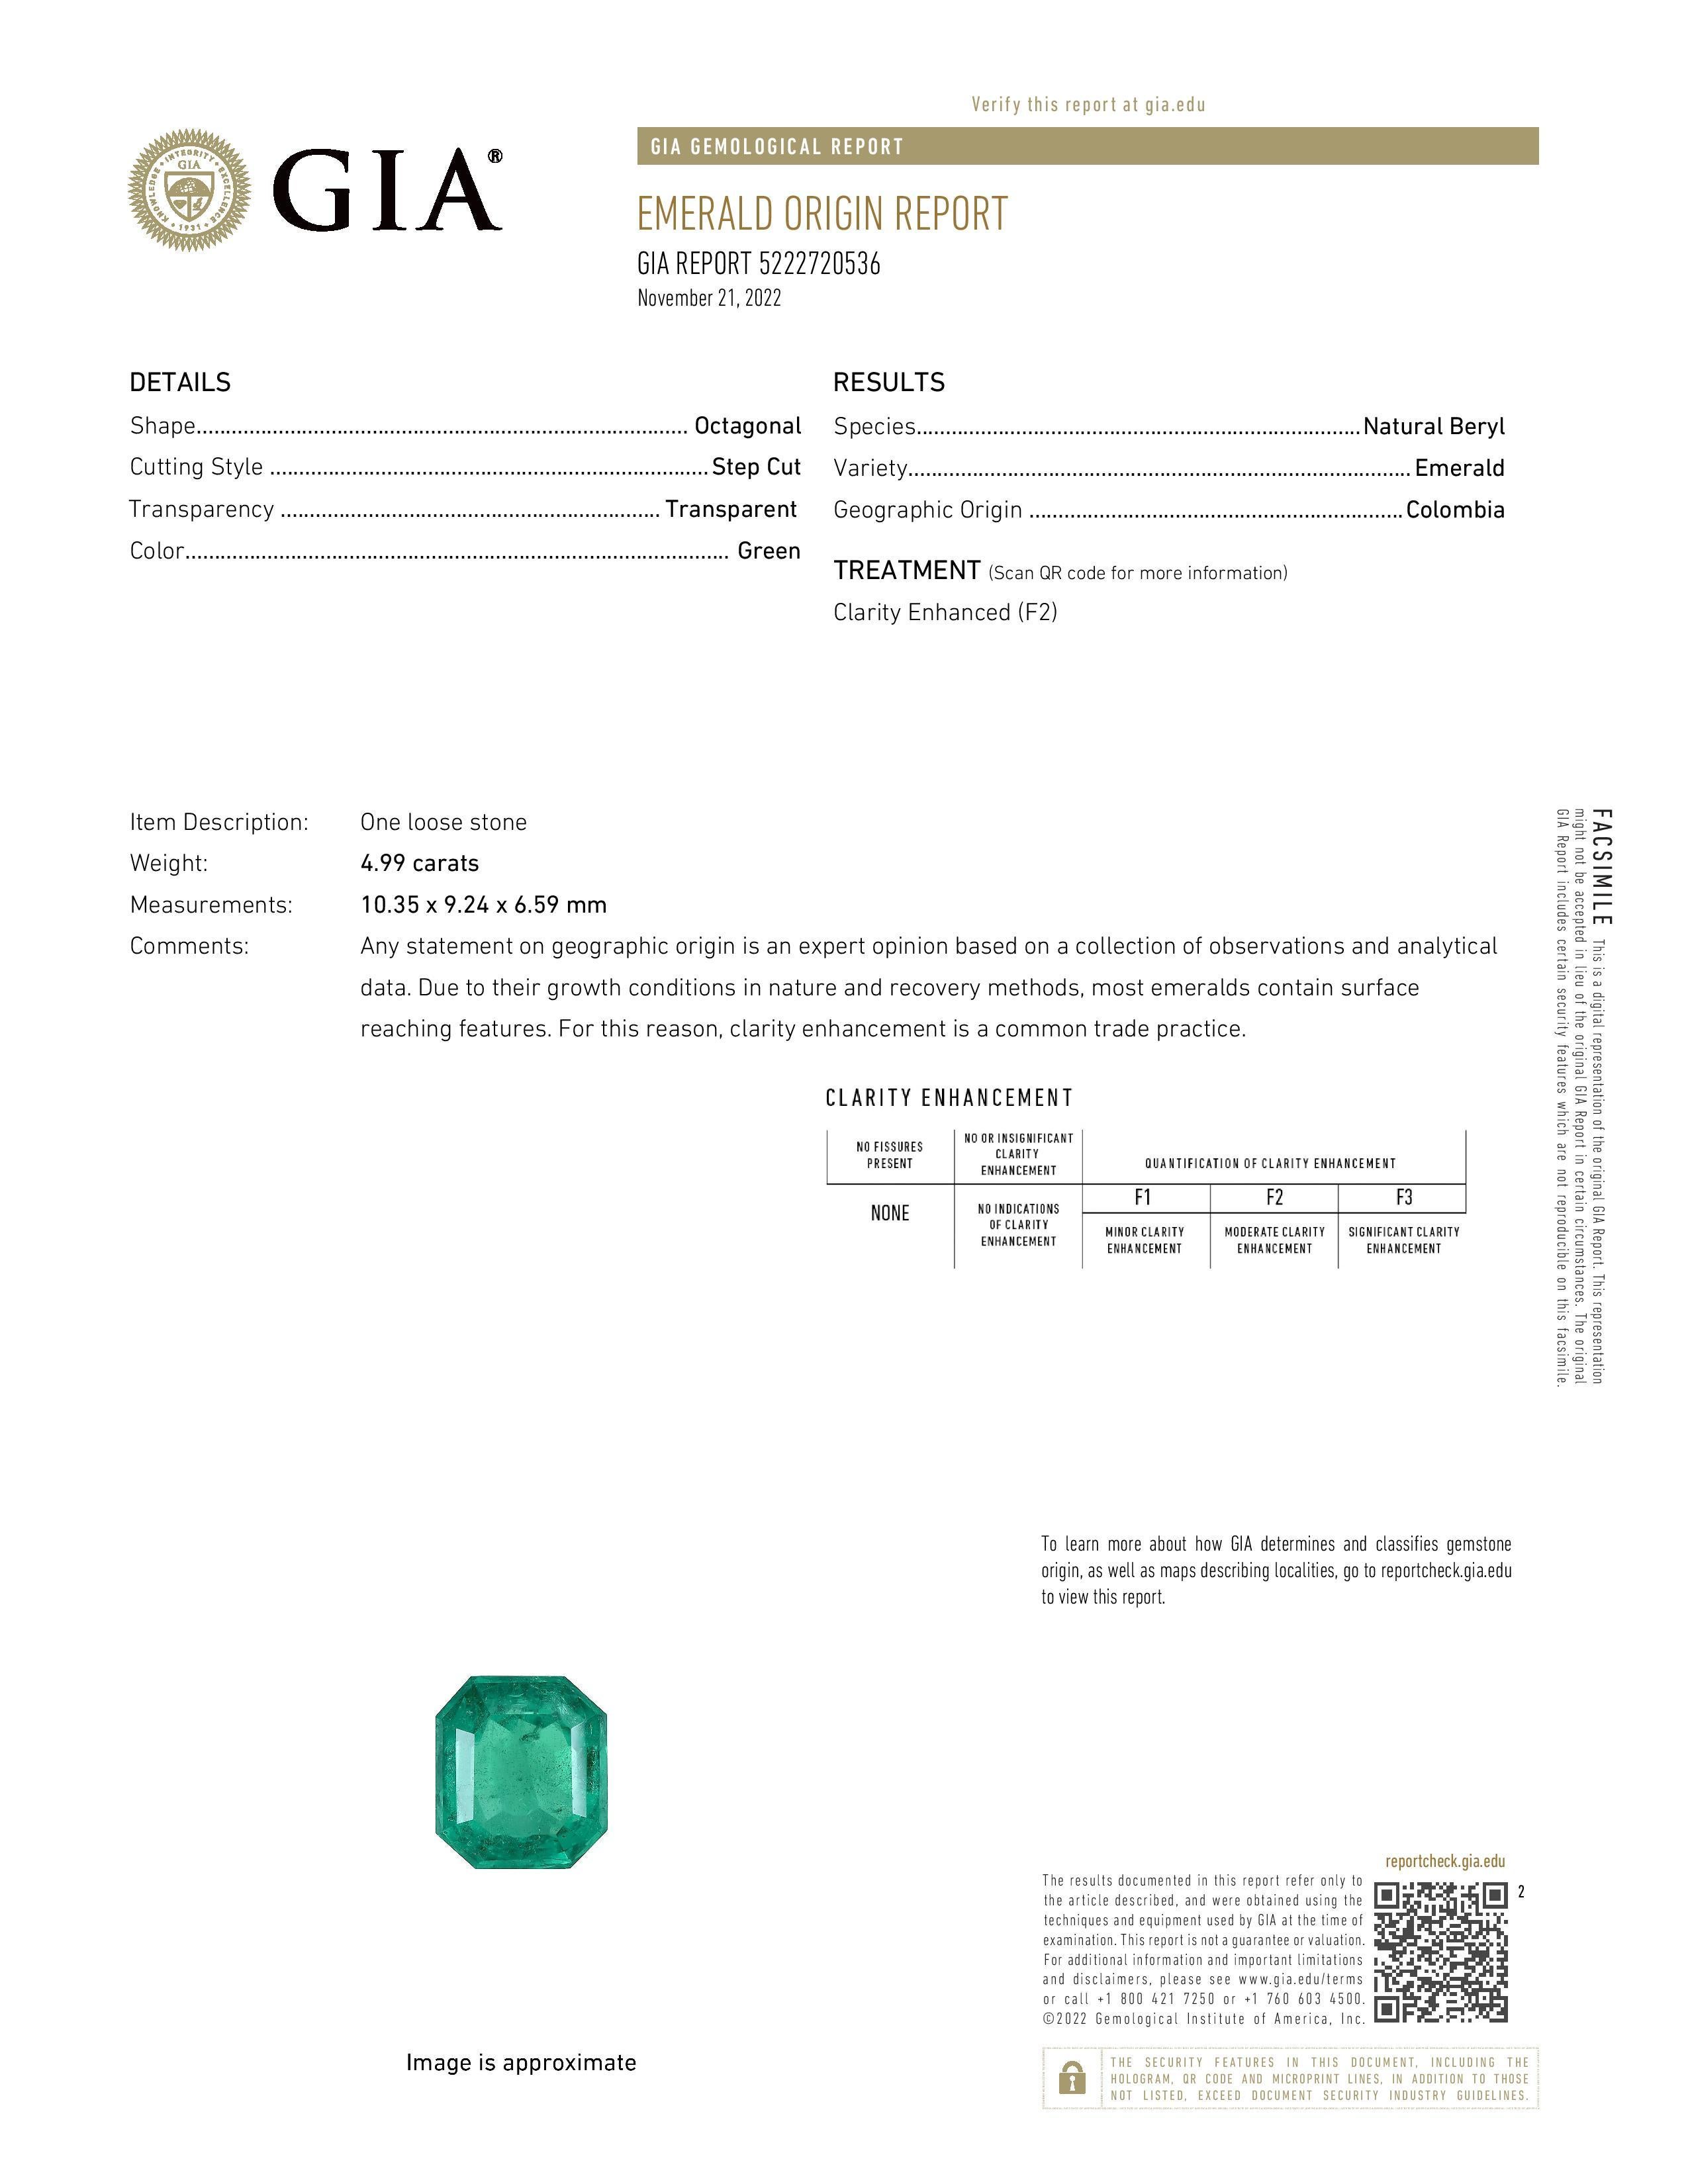 Emerald Cut Auction - GIA Certified 4.99 Carat Colombian Emerald and 2.01 Carat Diamond Ring For Sale